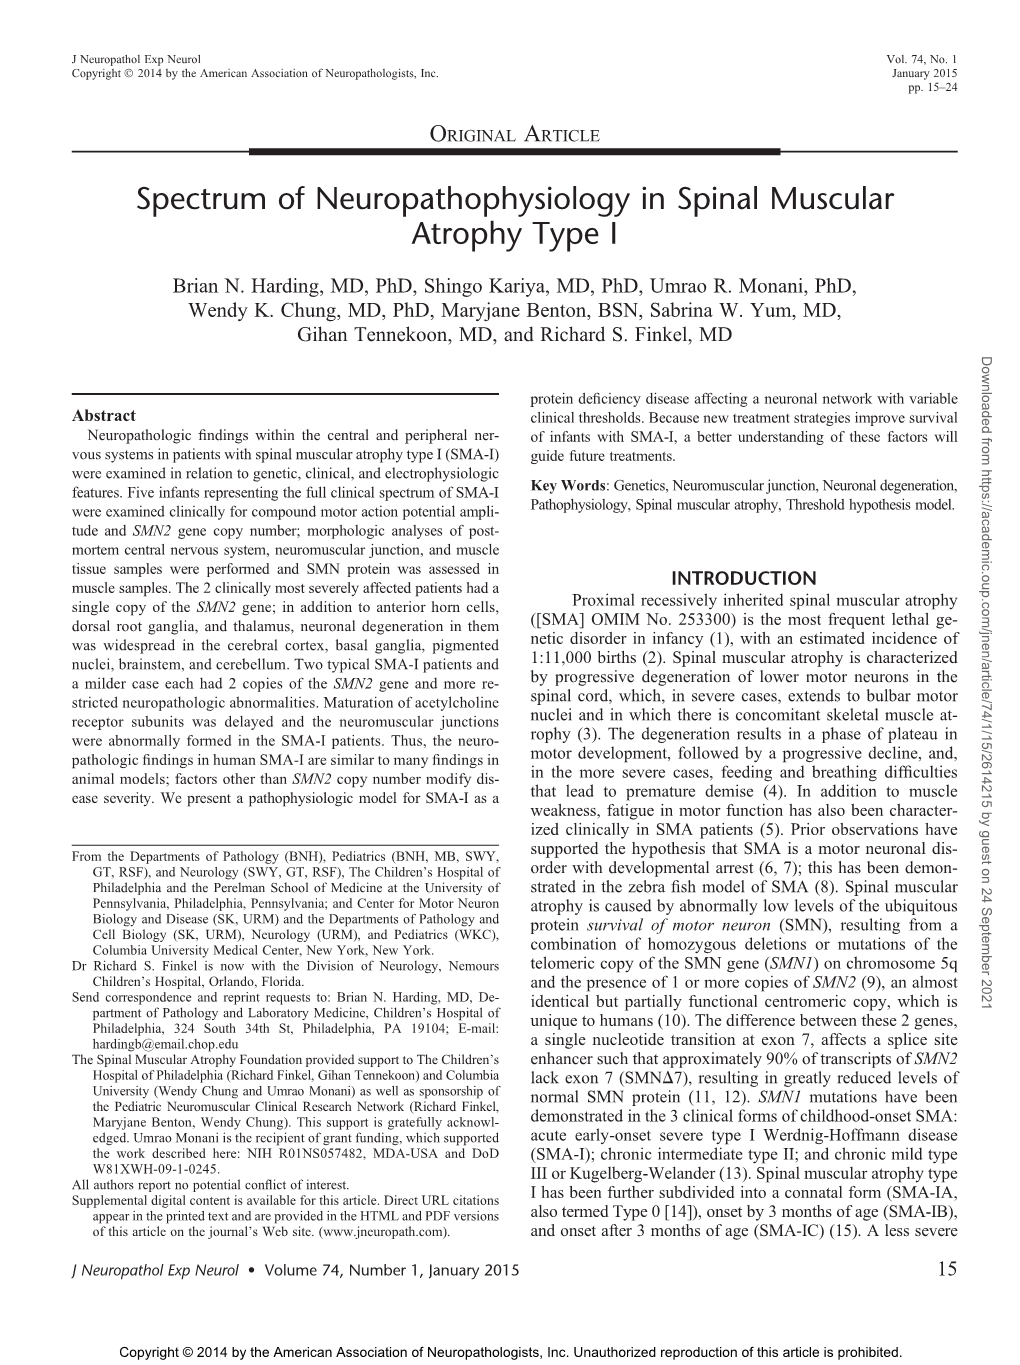 Spectrum of Neuropathophysiology in Spinal Muscular Atrophy Type I